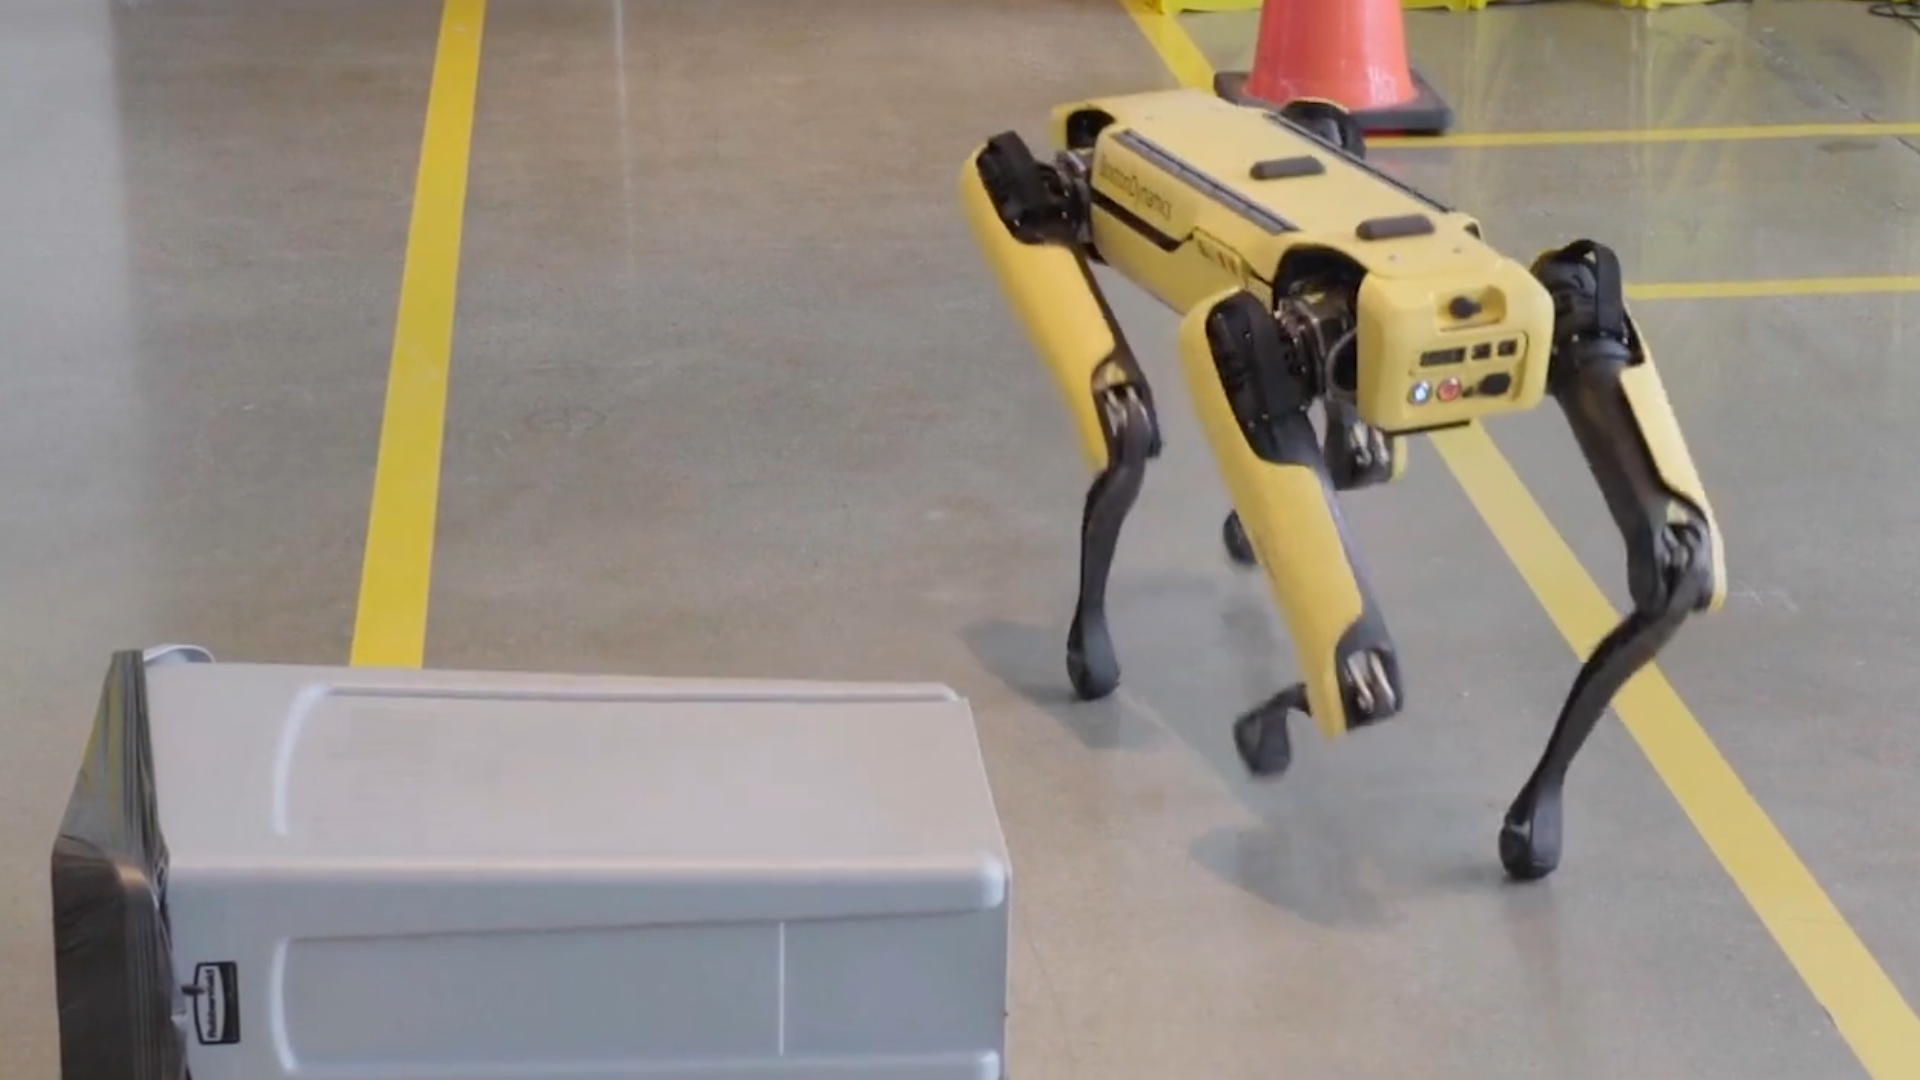  Engineers added ChatGPT to a robot dog and now it can talk 